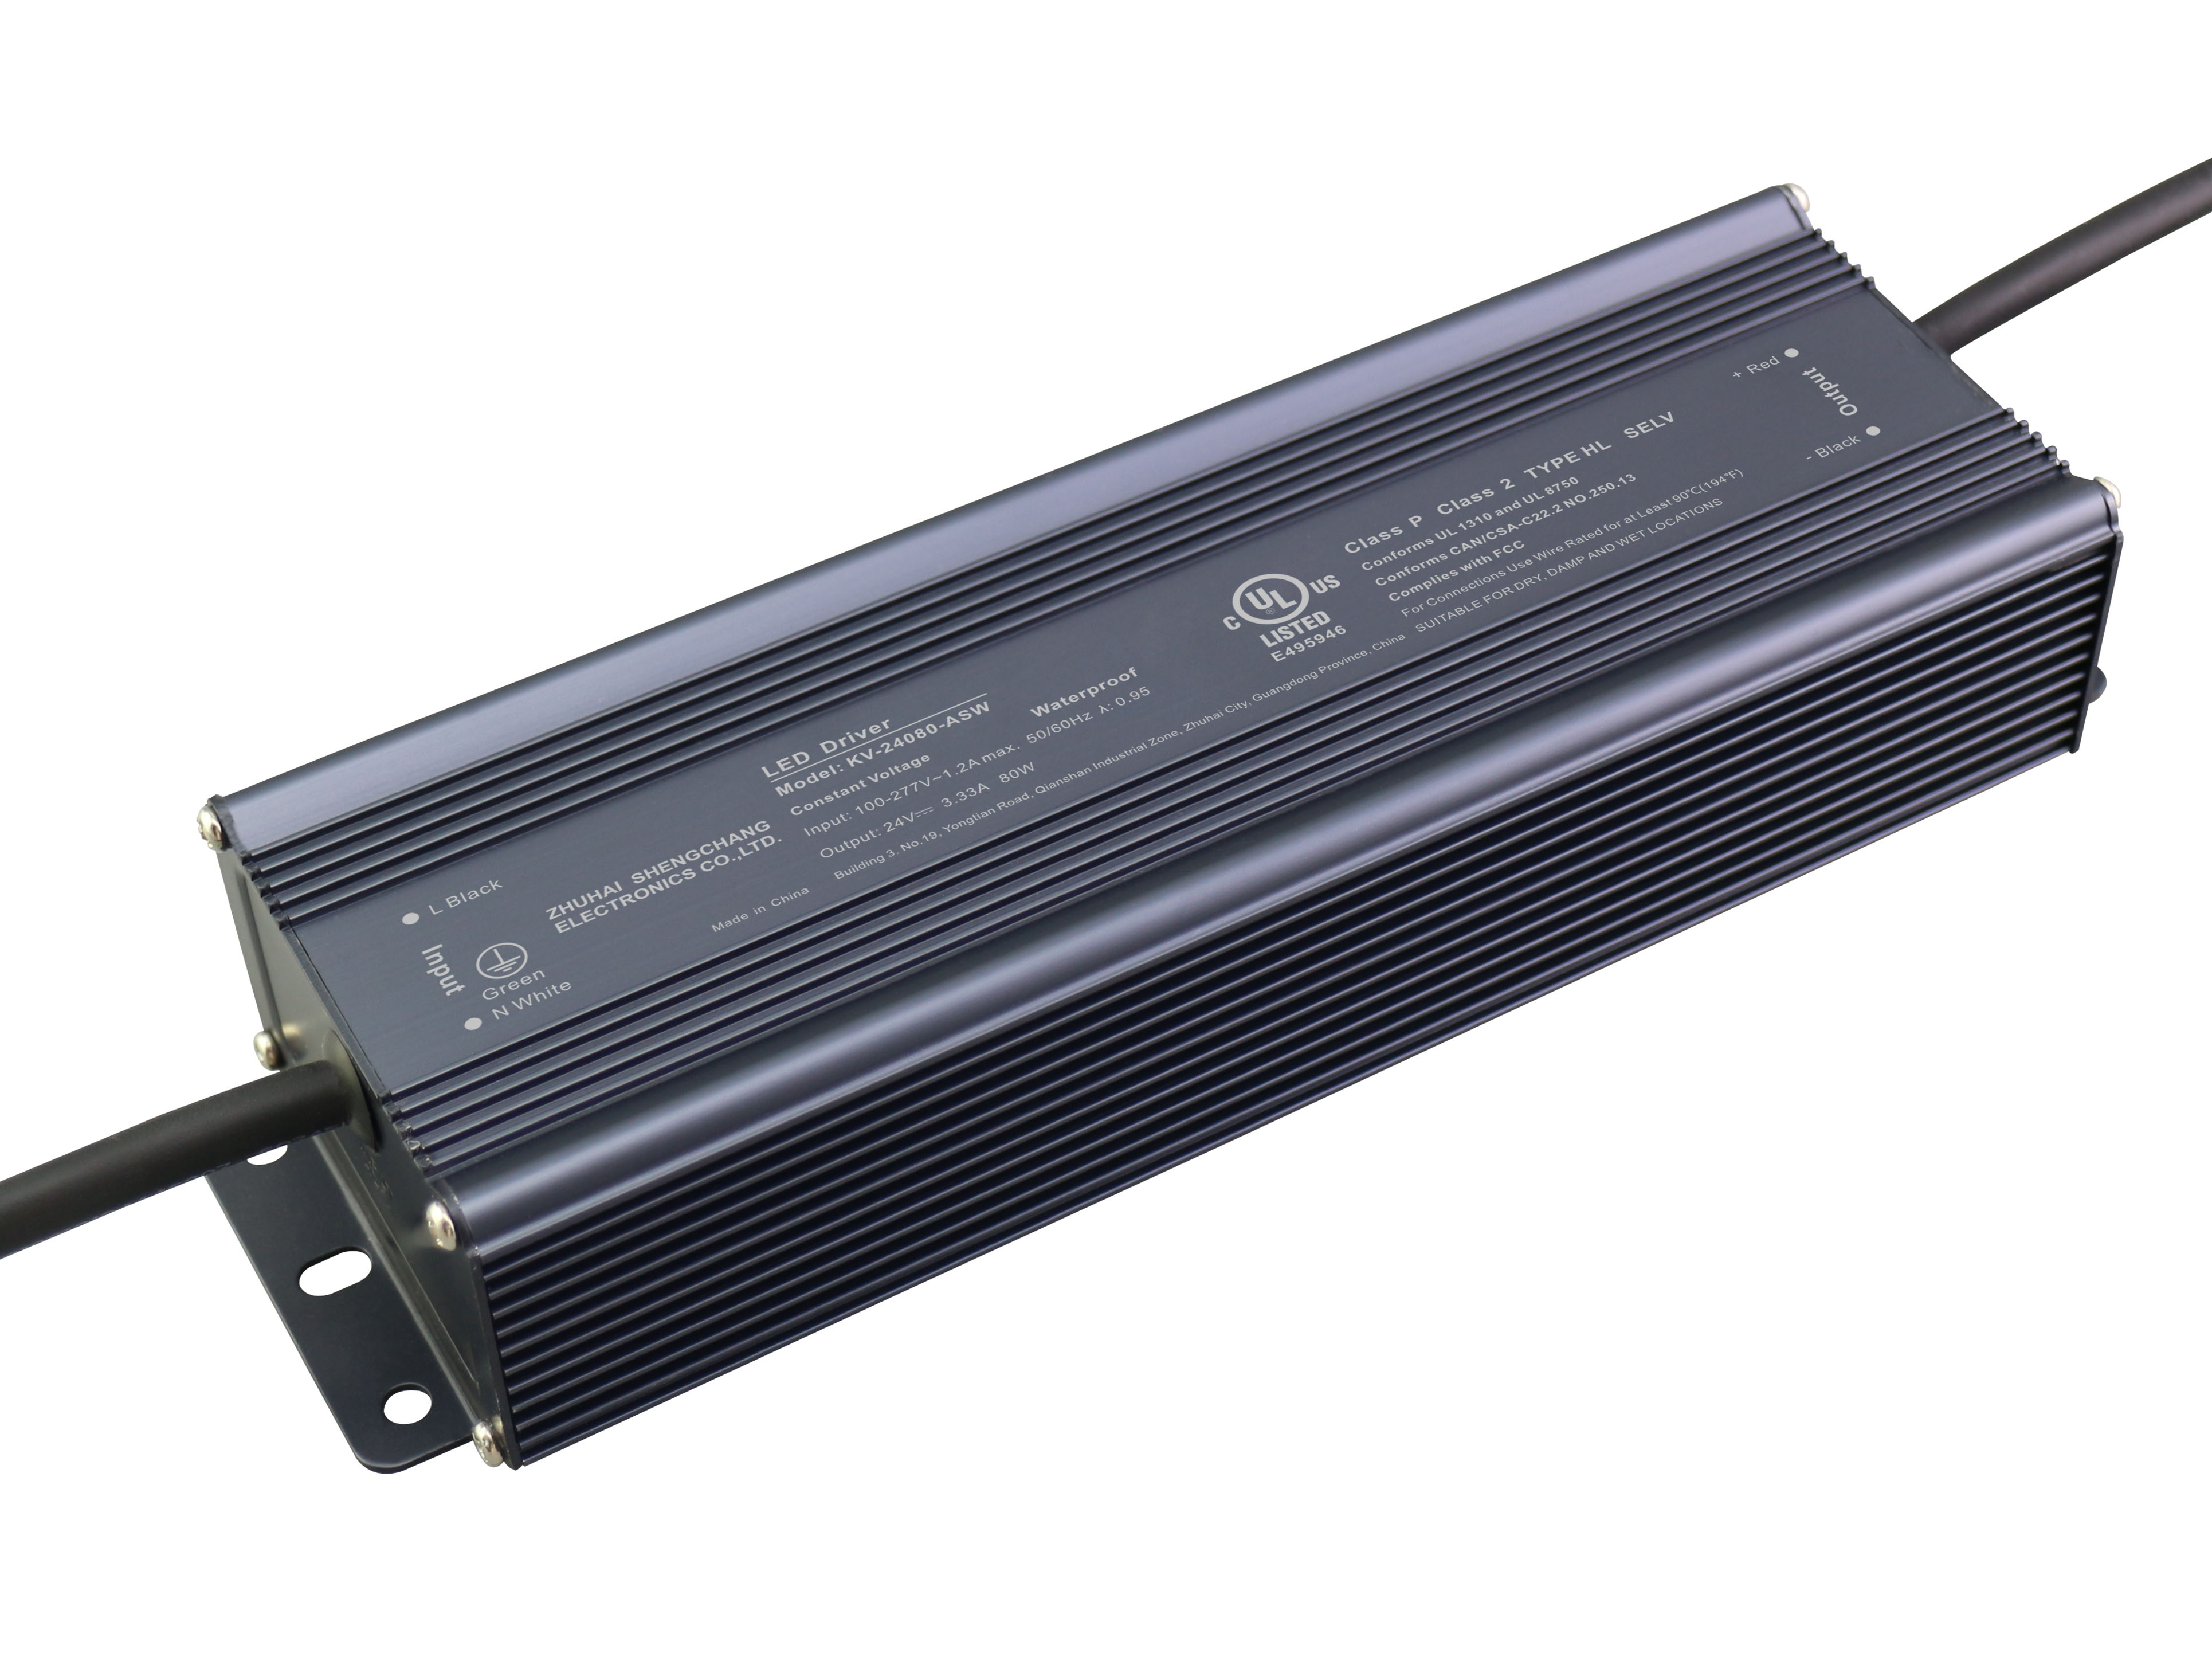 KV-ASW Series 80W Constant Voltage Non-Dimming LED Driver